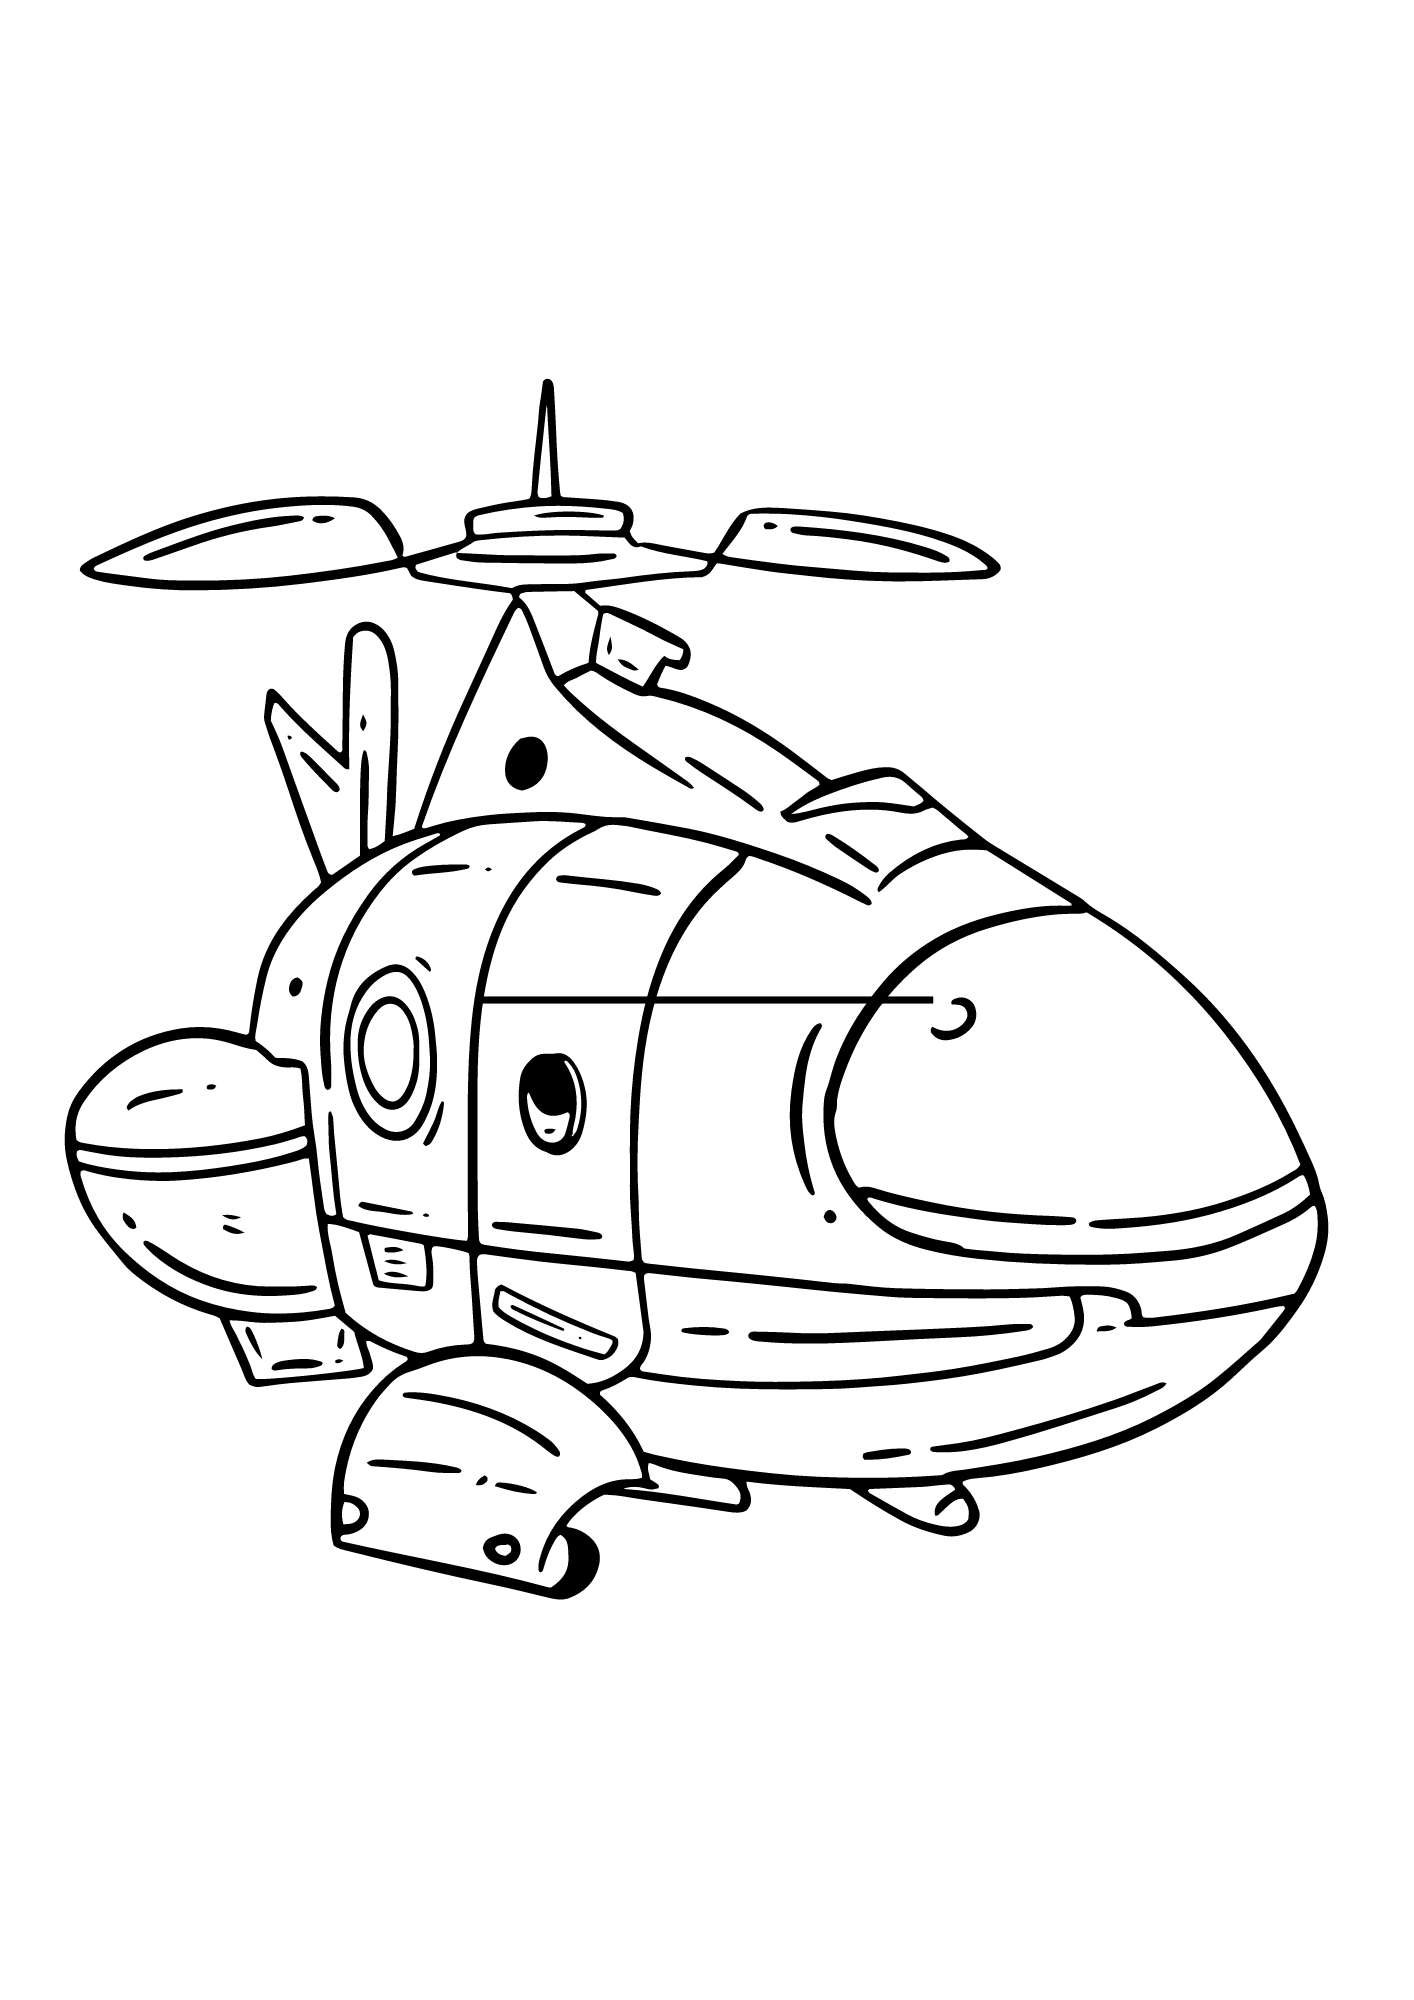 Helicopter For Children Printable Coloring Pages